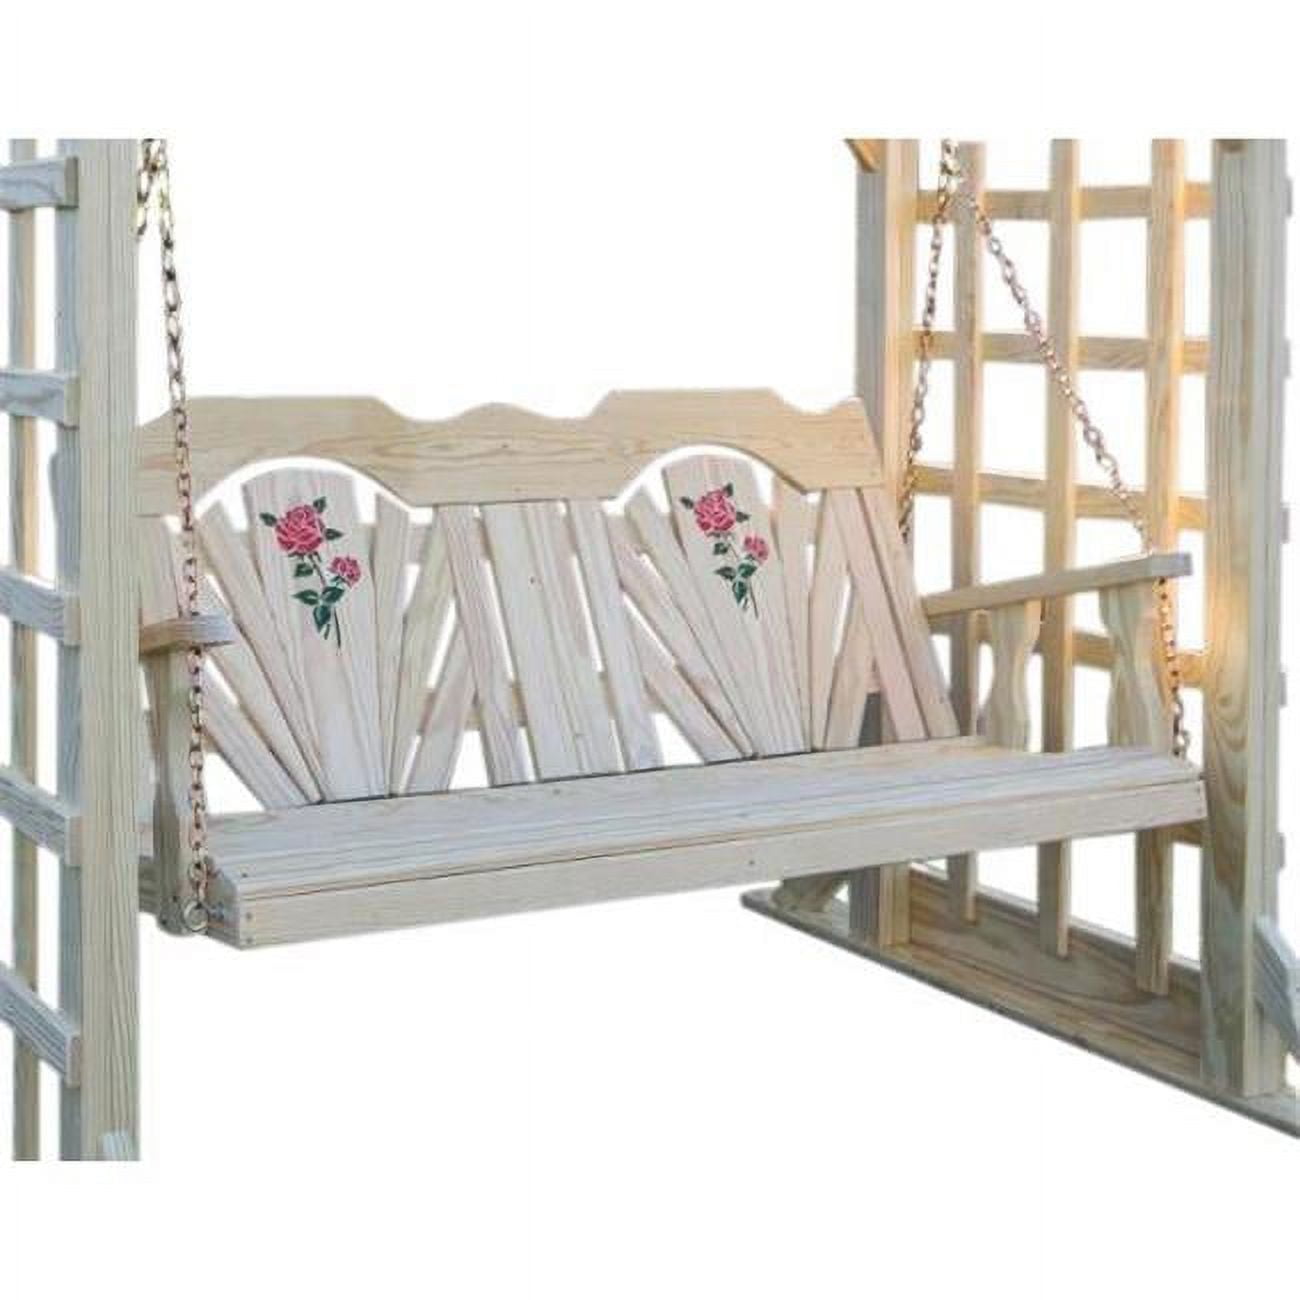 Picture of Creekvine Designs FS48FBROSECVD 53 in. Rose Design with Treated Pine Fanback Swing